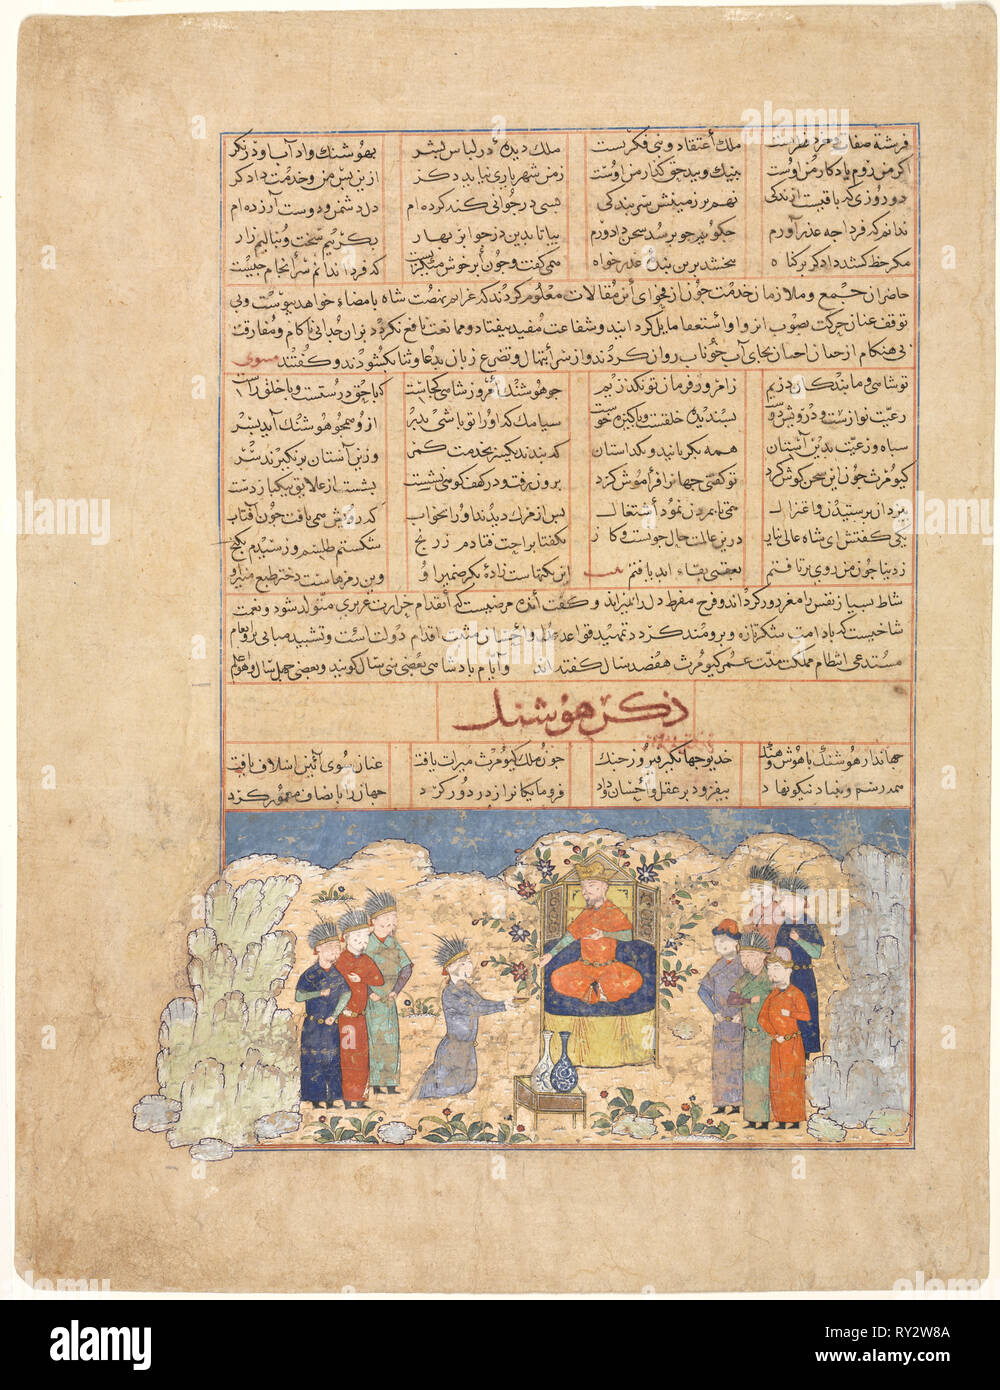 The Story of Hushang, from a Majma al-tavarikh (A Compendium of Histories) of Hafiz-i Abru, 1425 - 1450. Afghanistan, Herat, Timurid Iran. Opaque watercolor and ink on paper; image: 11 x 25.7 cm (4 5/16 x 10 1/8 in.); overall: 42 x 32 cm (16 9/16 x 12 5/8 in.); text area: 22.6 x 22.8 cm (8 7/8 x 9 in Stock Photo